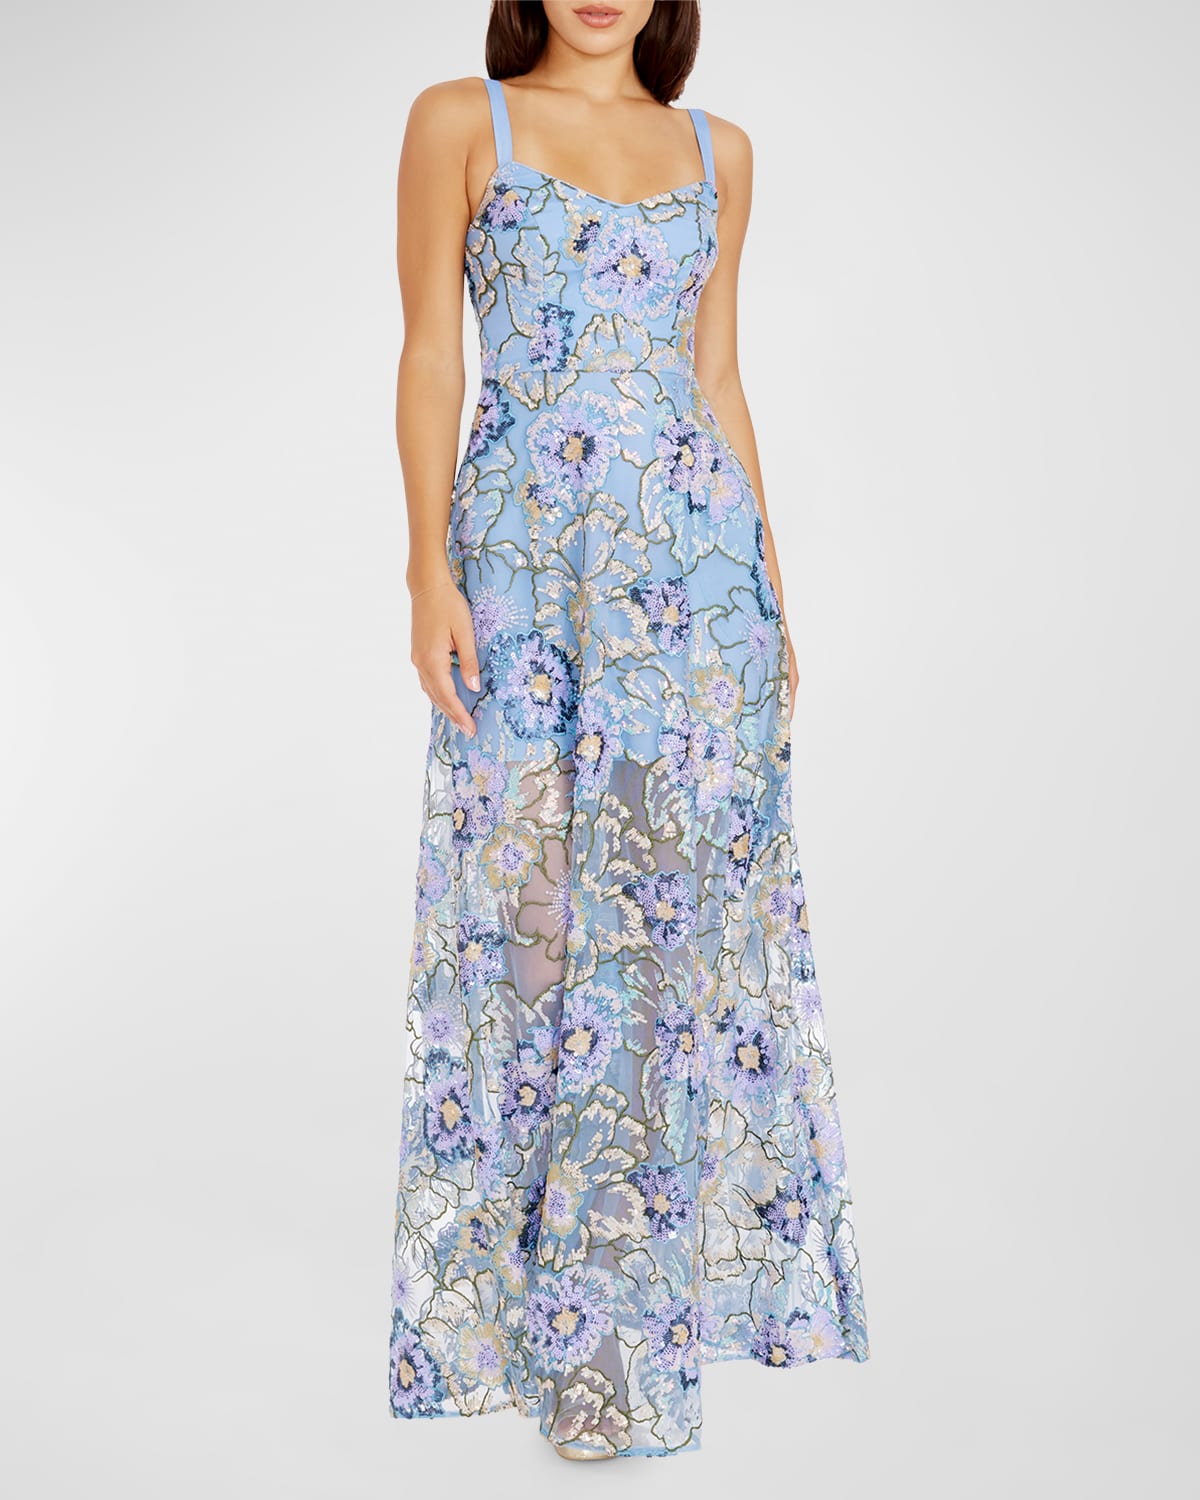 Shop Dress The Population Black Label Nina Sleeveless Sequin Floral A-line Gown In Sky Multi